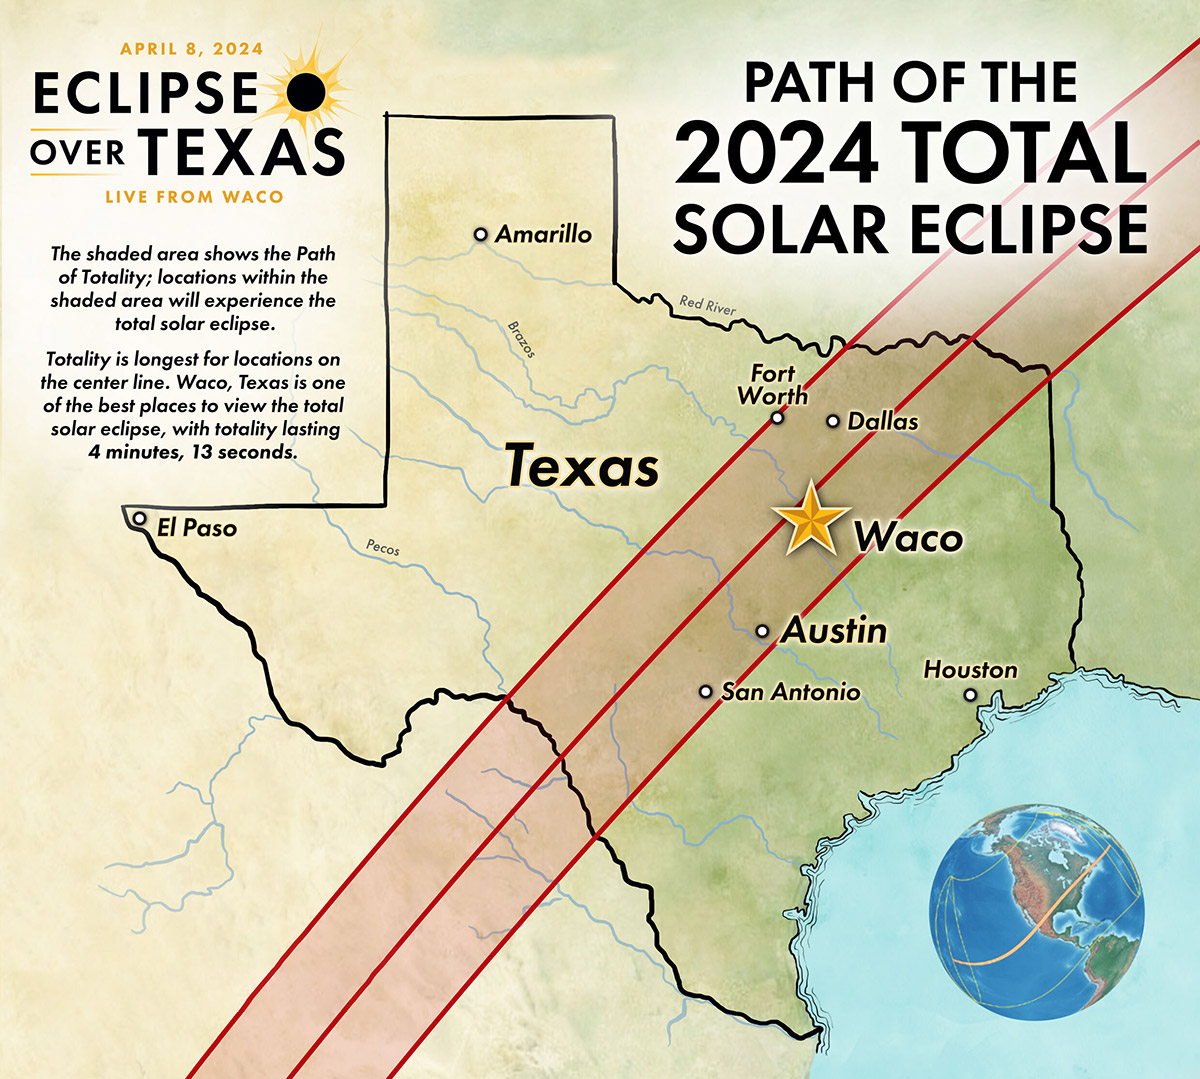 Eclipse Over Texas Map 2024 Total Solar Eclipse Baylor University